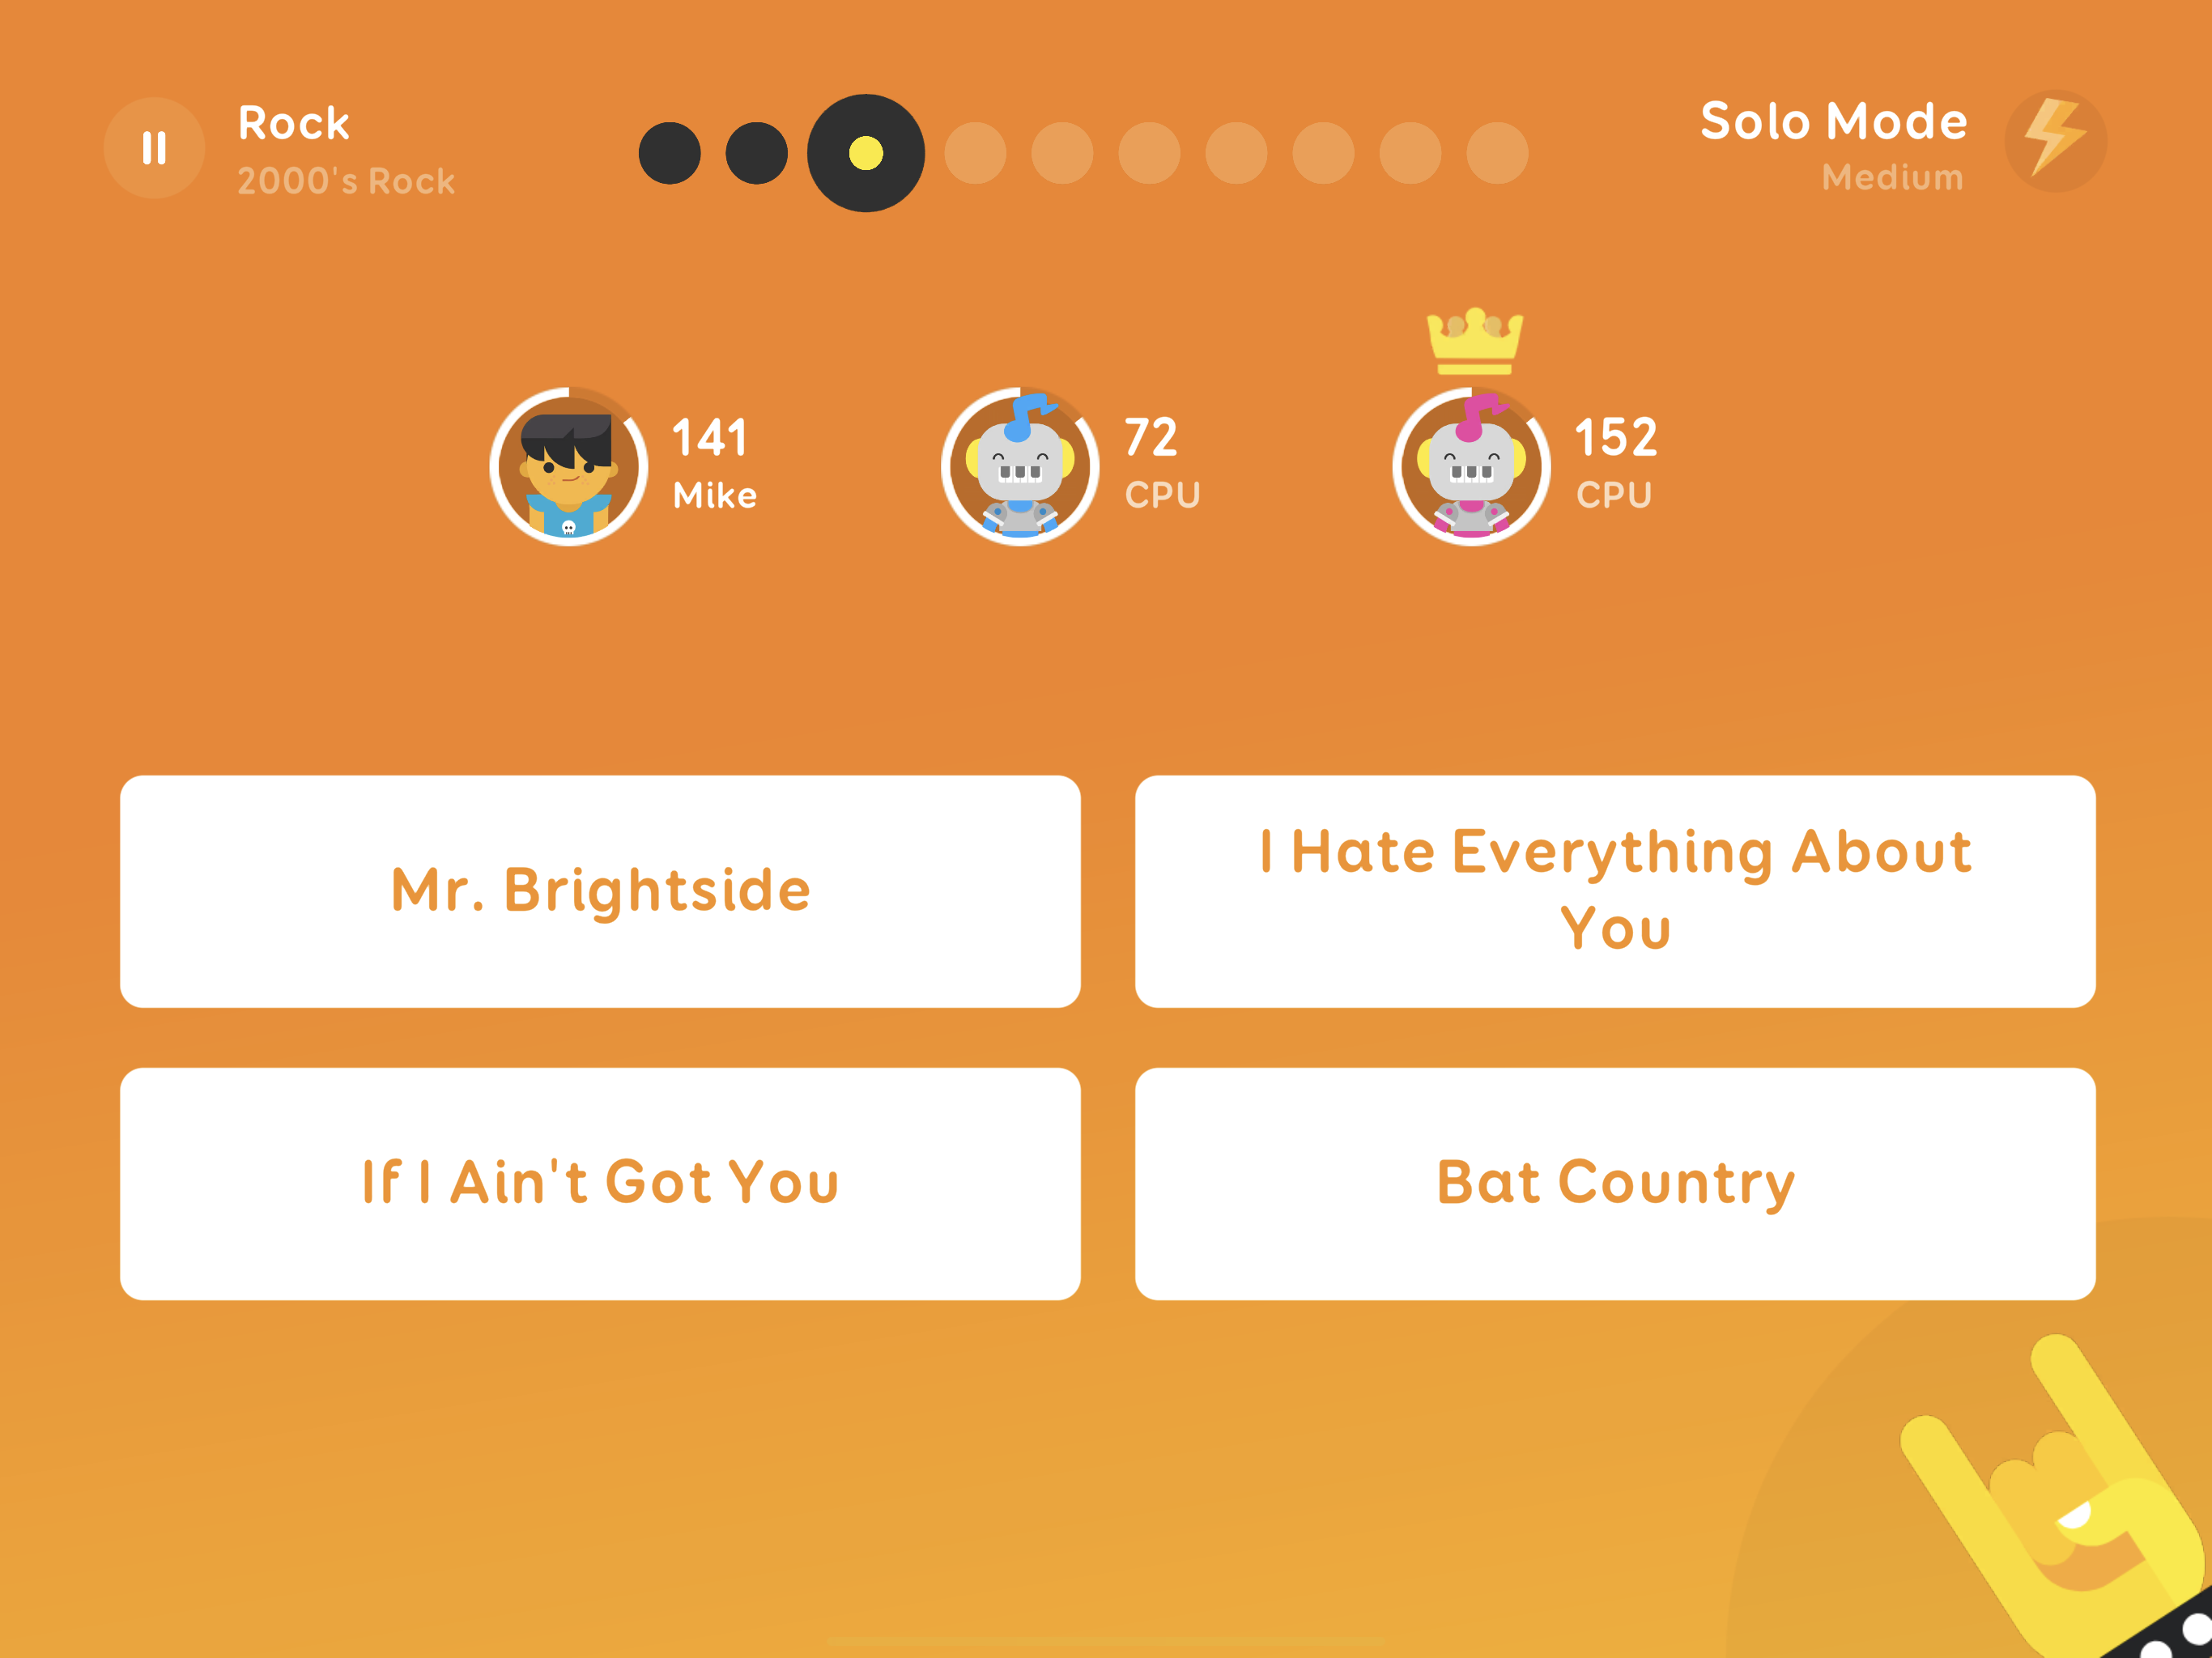 SongPop Party for mac download